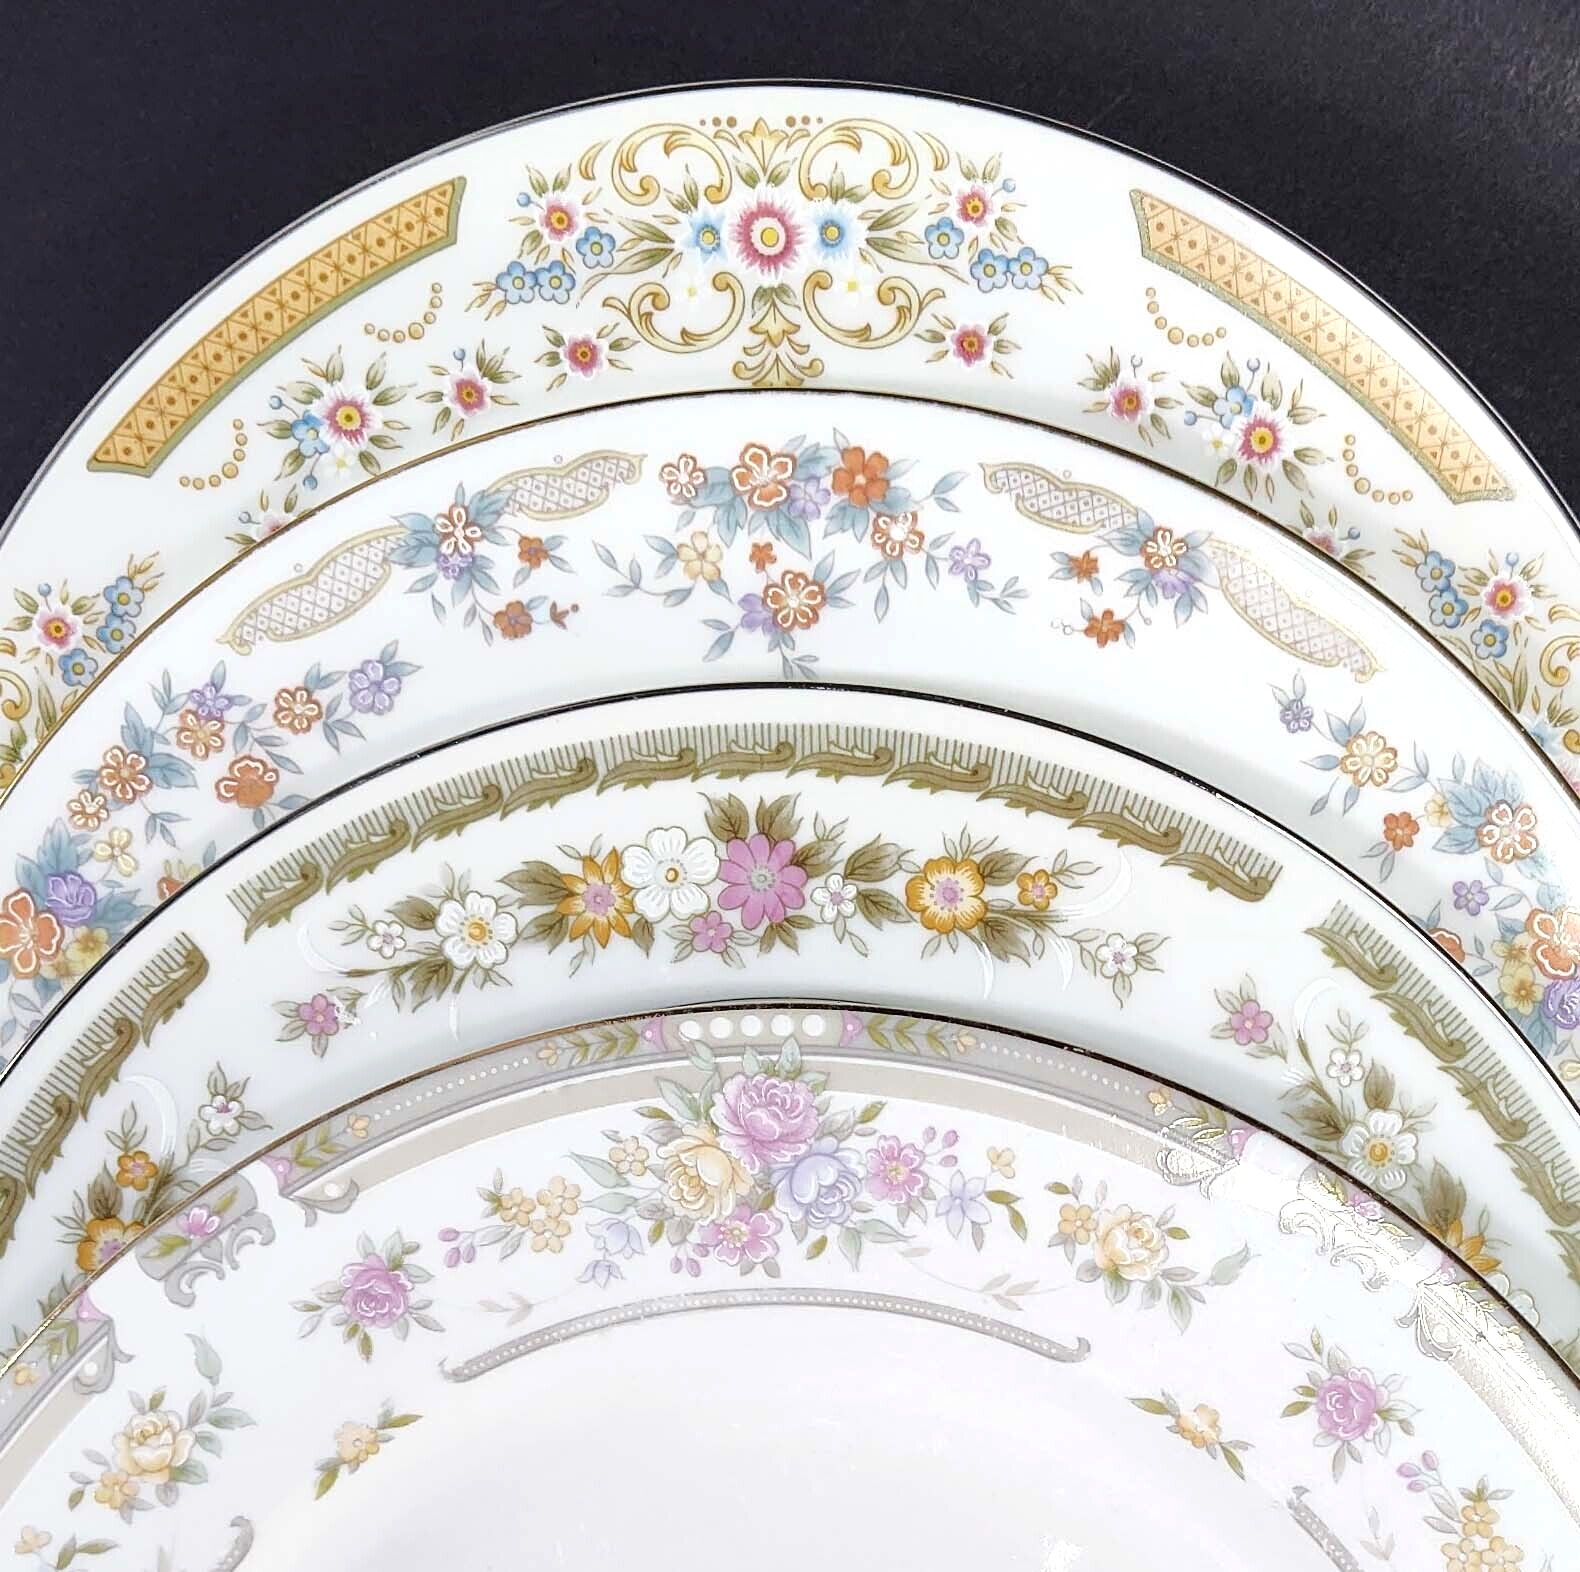 Mismatched Dinner Plates Floral Rims Vintage China Plates Mix and Match Set of 4